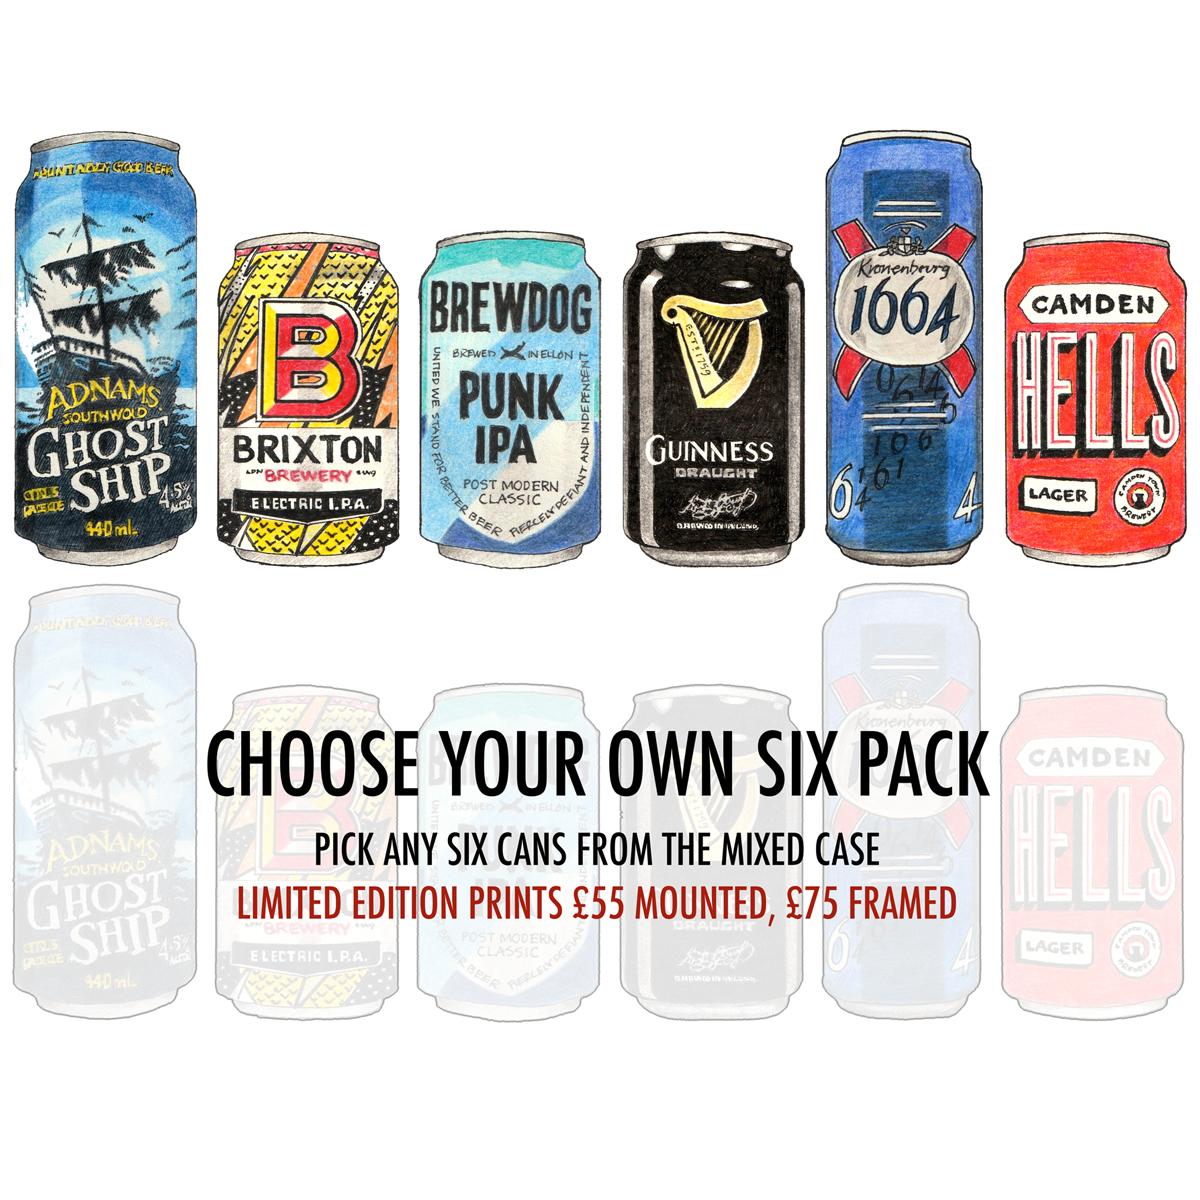 Six pack - offer promotion